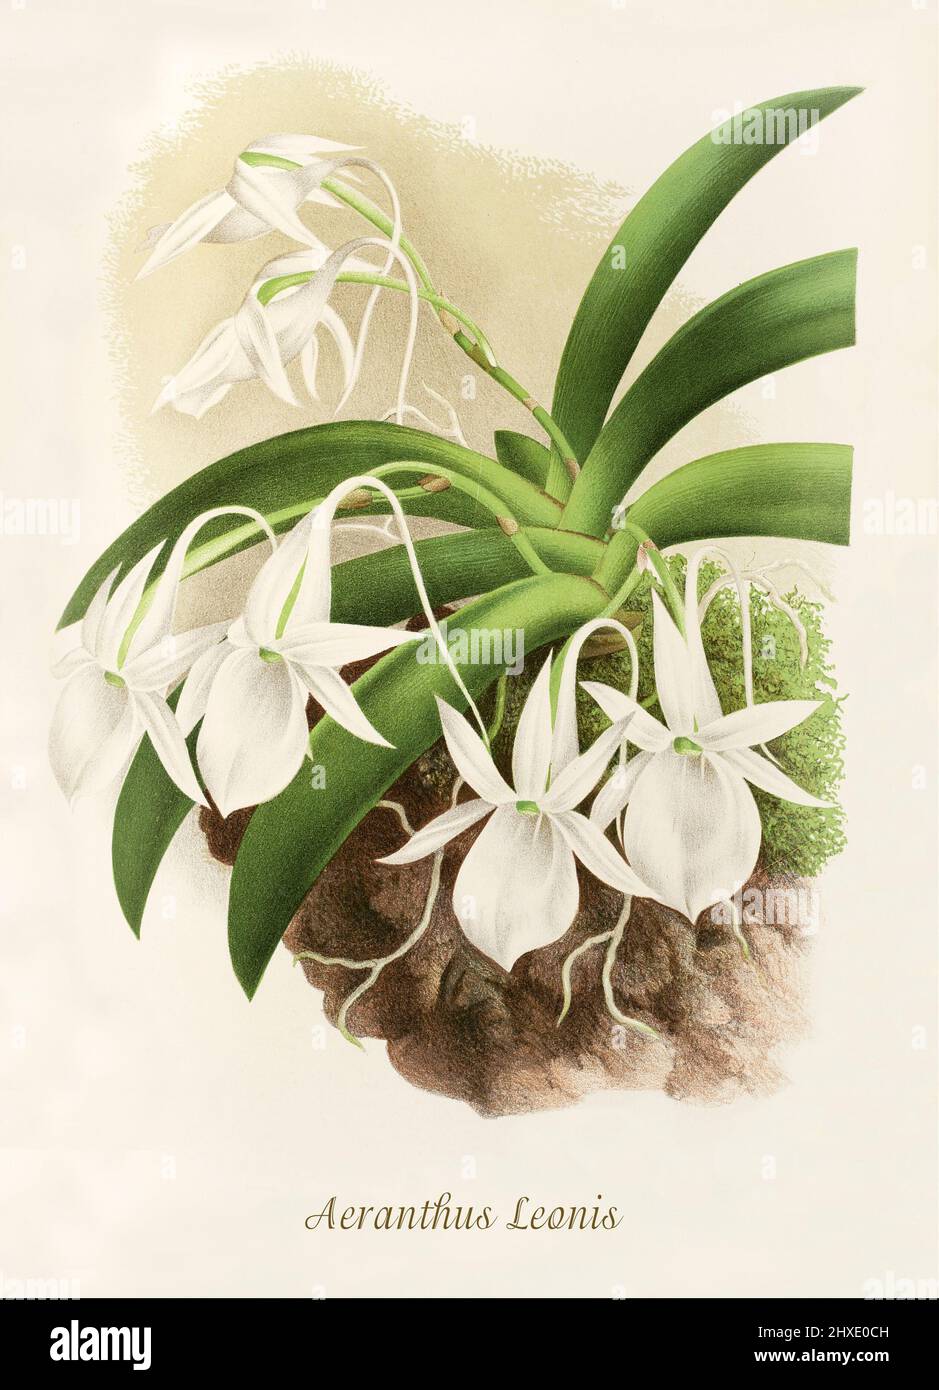 Aeranthus leonis, now Angraecum leonis is a species of flowering plant in the Orchidaceae family, its native range is Comoros, Madagascar. From Iconographie des Orchidees, a magazine of botanical illustrations published by Jean Jules Linden (1817-1898) was a Belgian botanist, explorer and horticulturist who specialised in orchids. Stock Photo